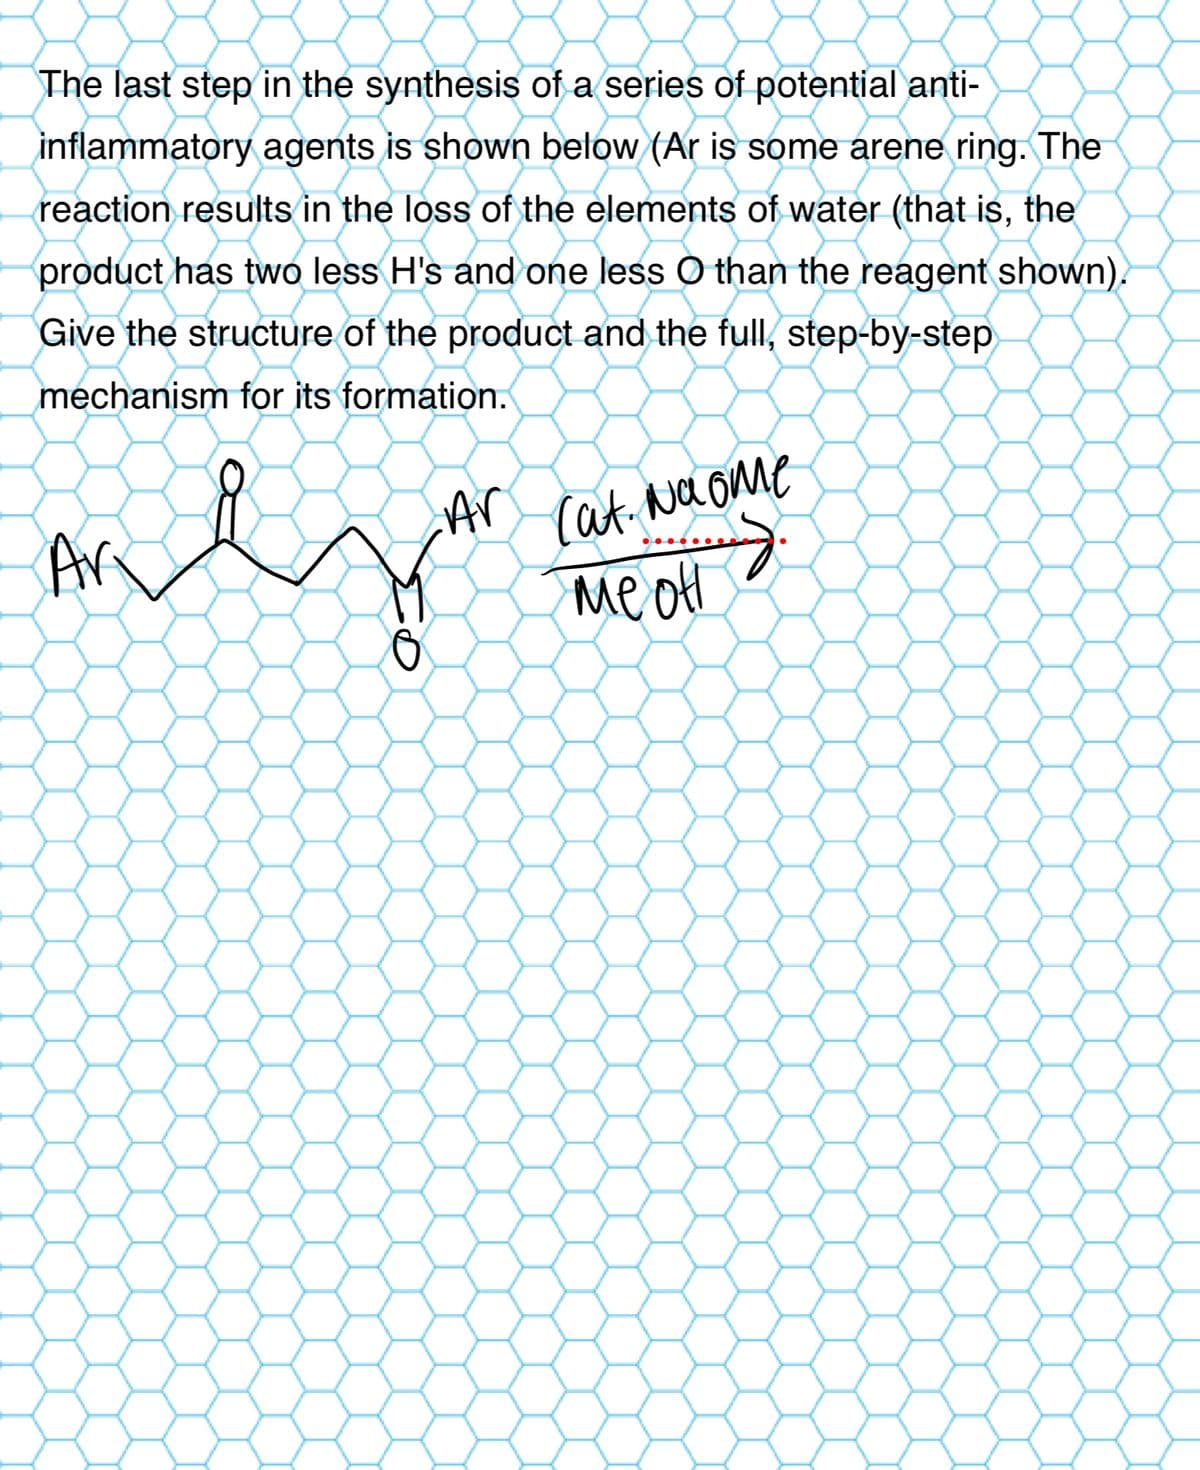 The last step in the synthesis of a series of potential anti-
inflammatory agents is shown below (Ar is some arene ring. The
reaction results in the loss of the elements of water (that is, the
product has two less H's and one less O than the reagent shown).
Give the structure of the product and the full, step-by-step
mechanism for its formation.
Ar
Ar
Cat. Na ome
Me of